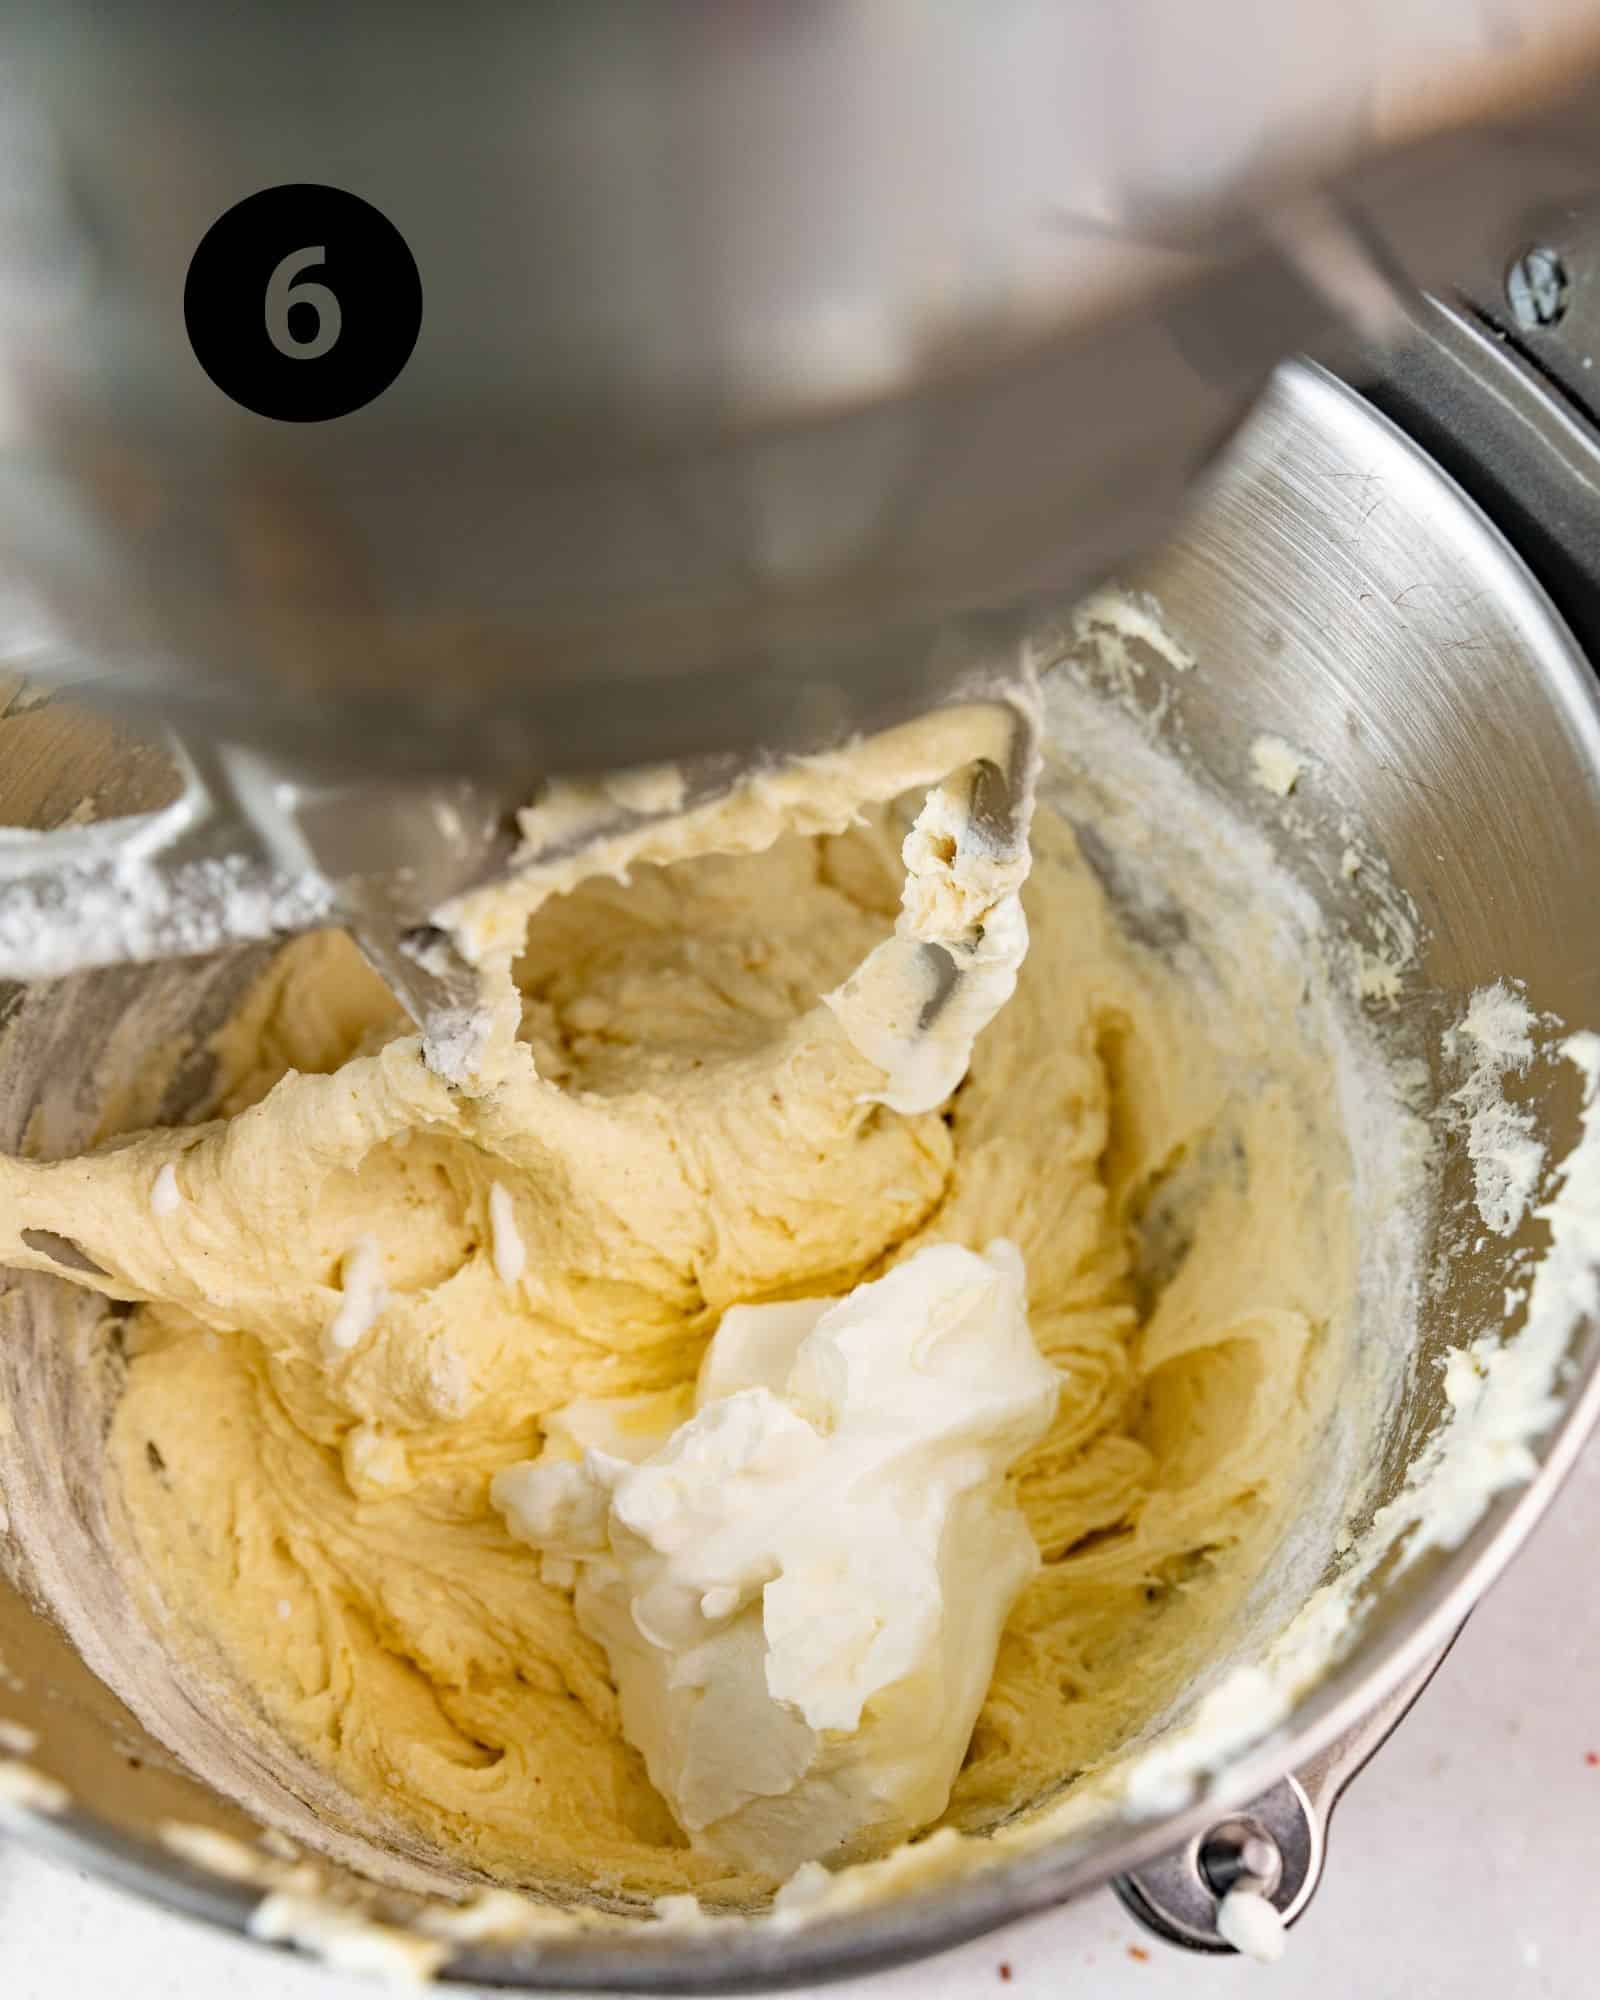 sour cream and milk added to the cake batter in a stand mixer.